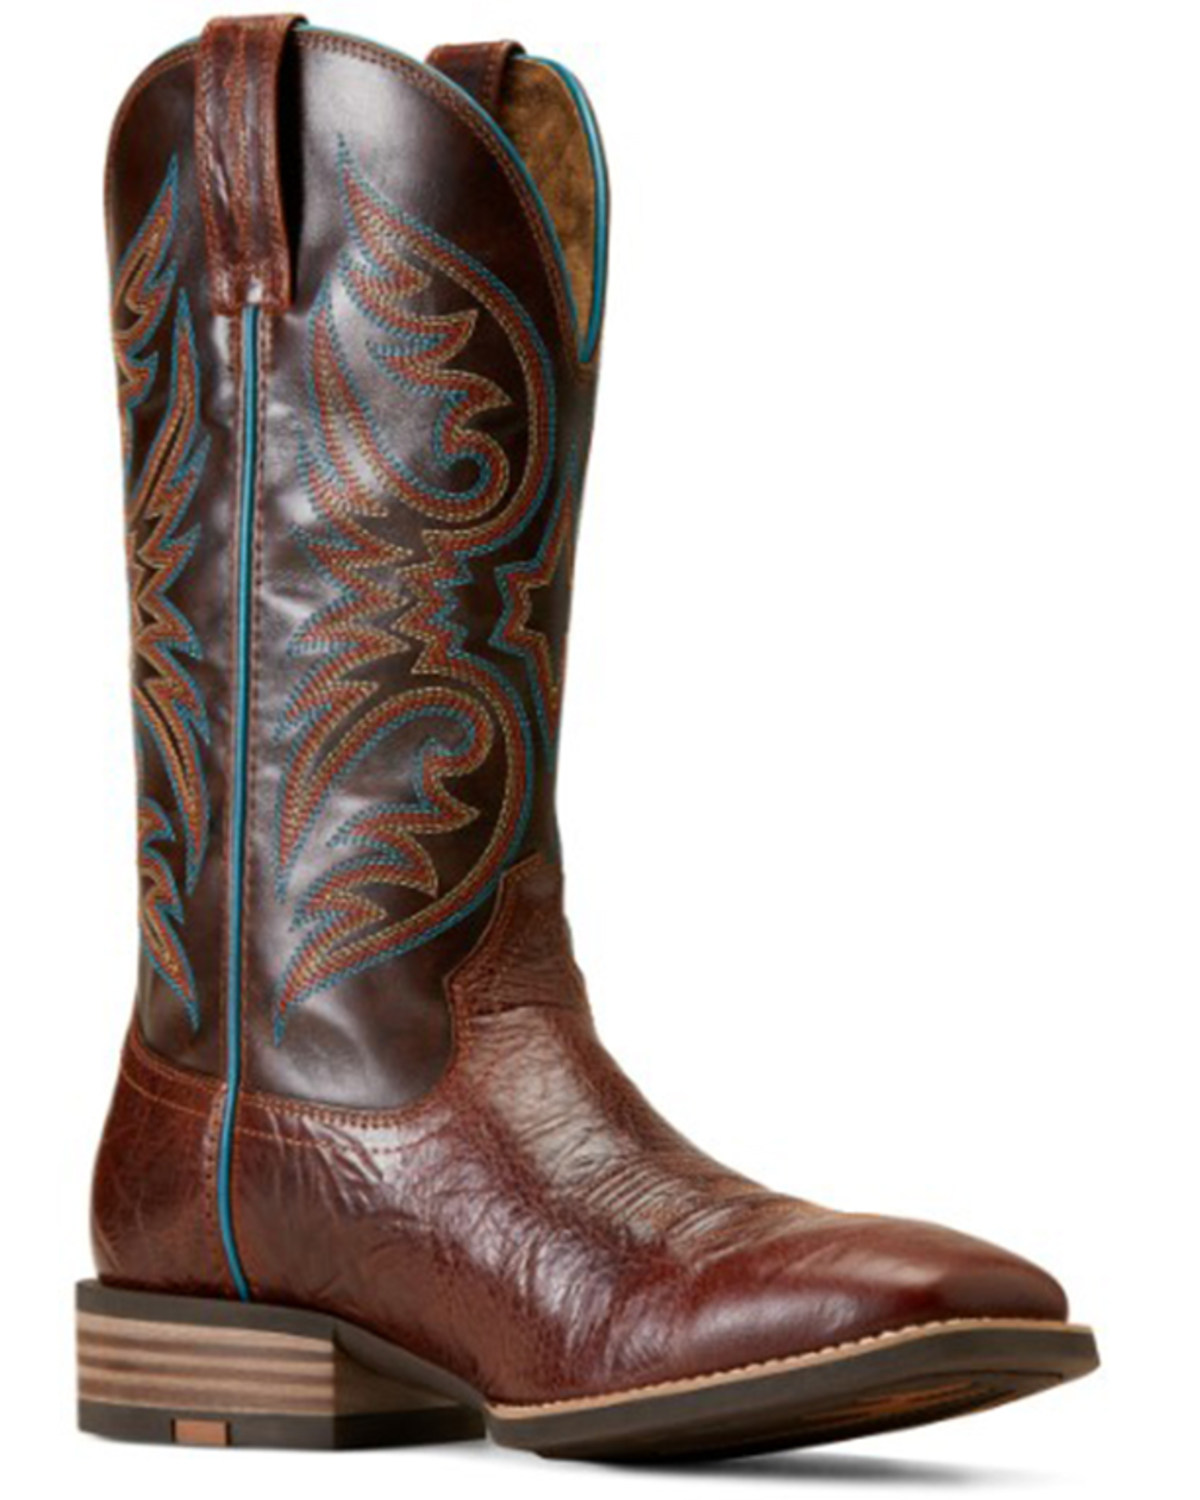 Ariat Men's Ricochet Western Performance Boots - Broad Square Toe